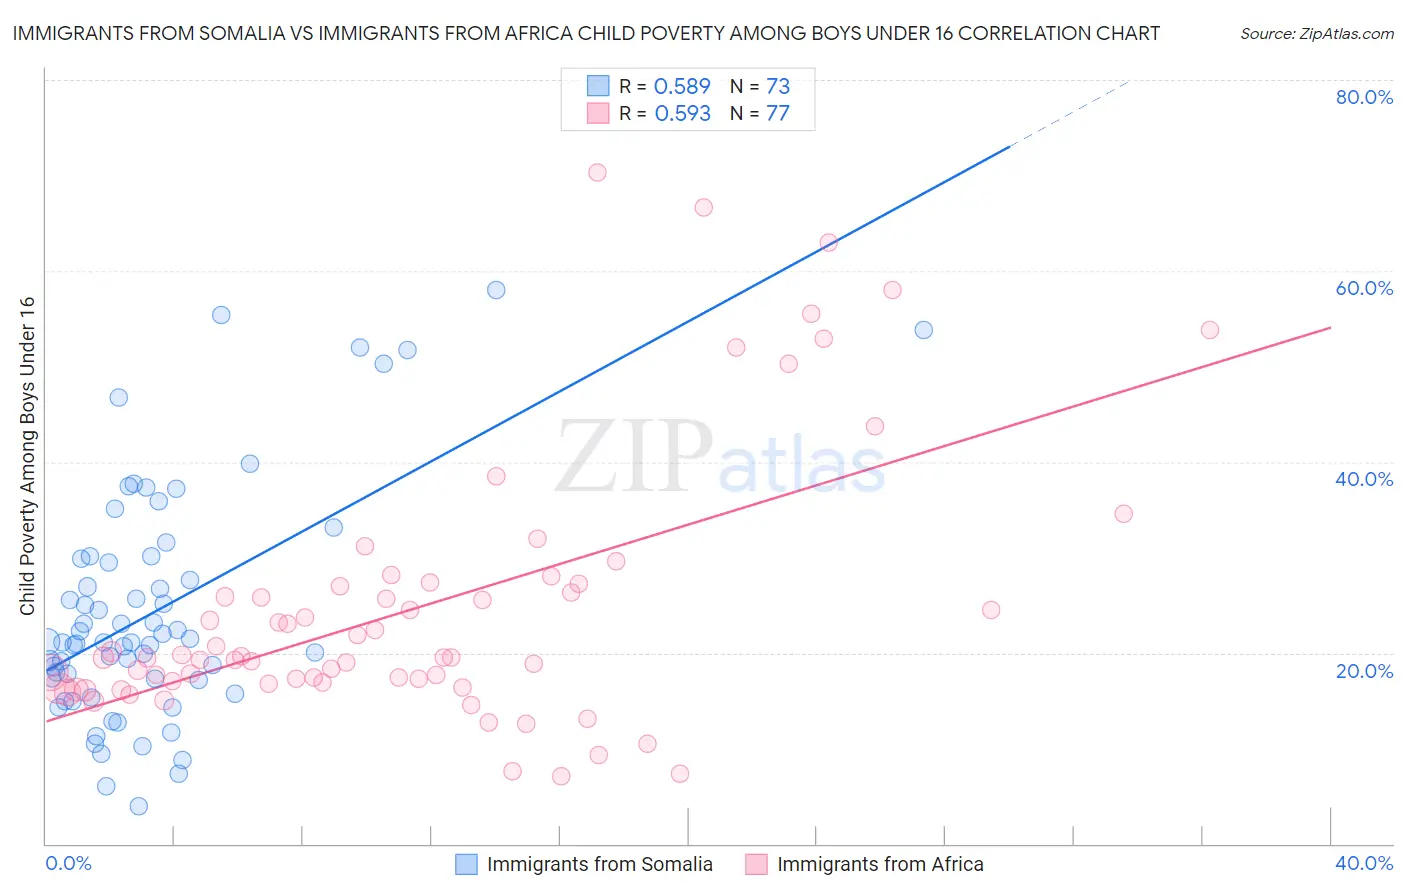 Immigrants from Somalia vs Immigrants from Africa Child Poverty Among Boys Under 16